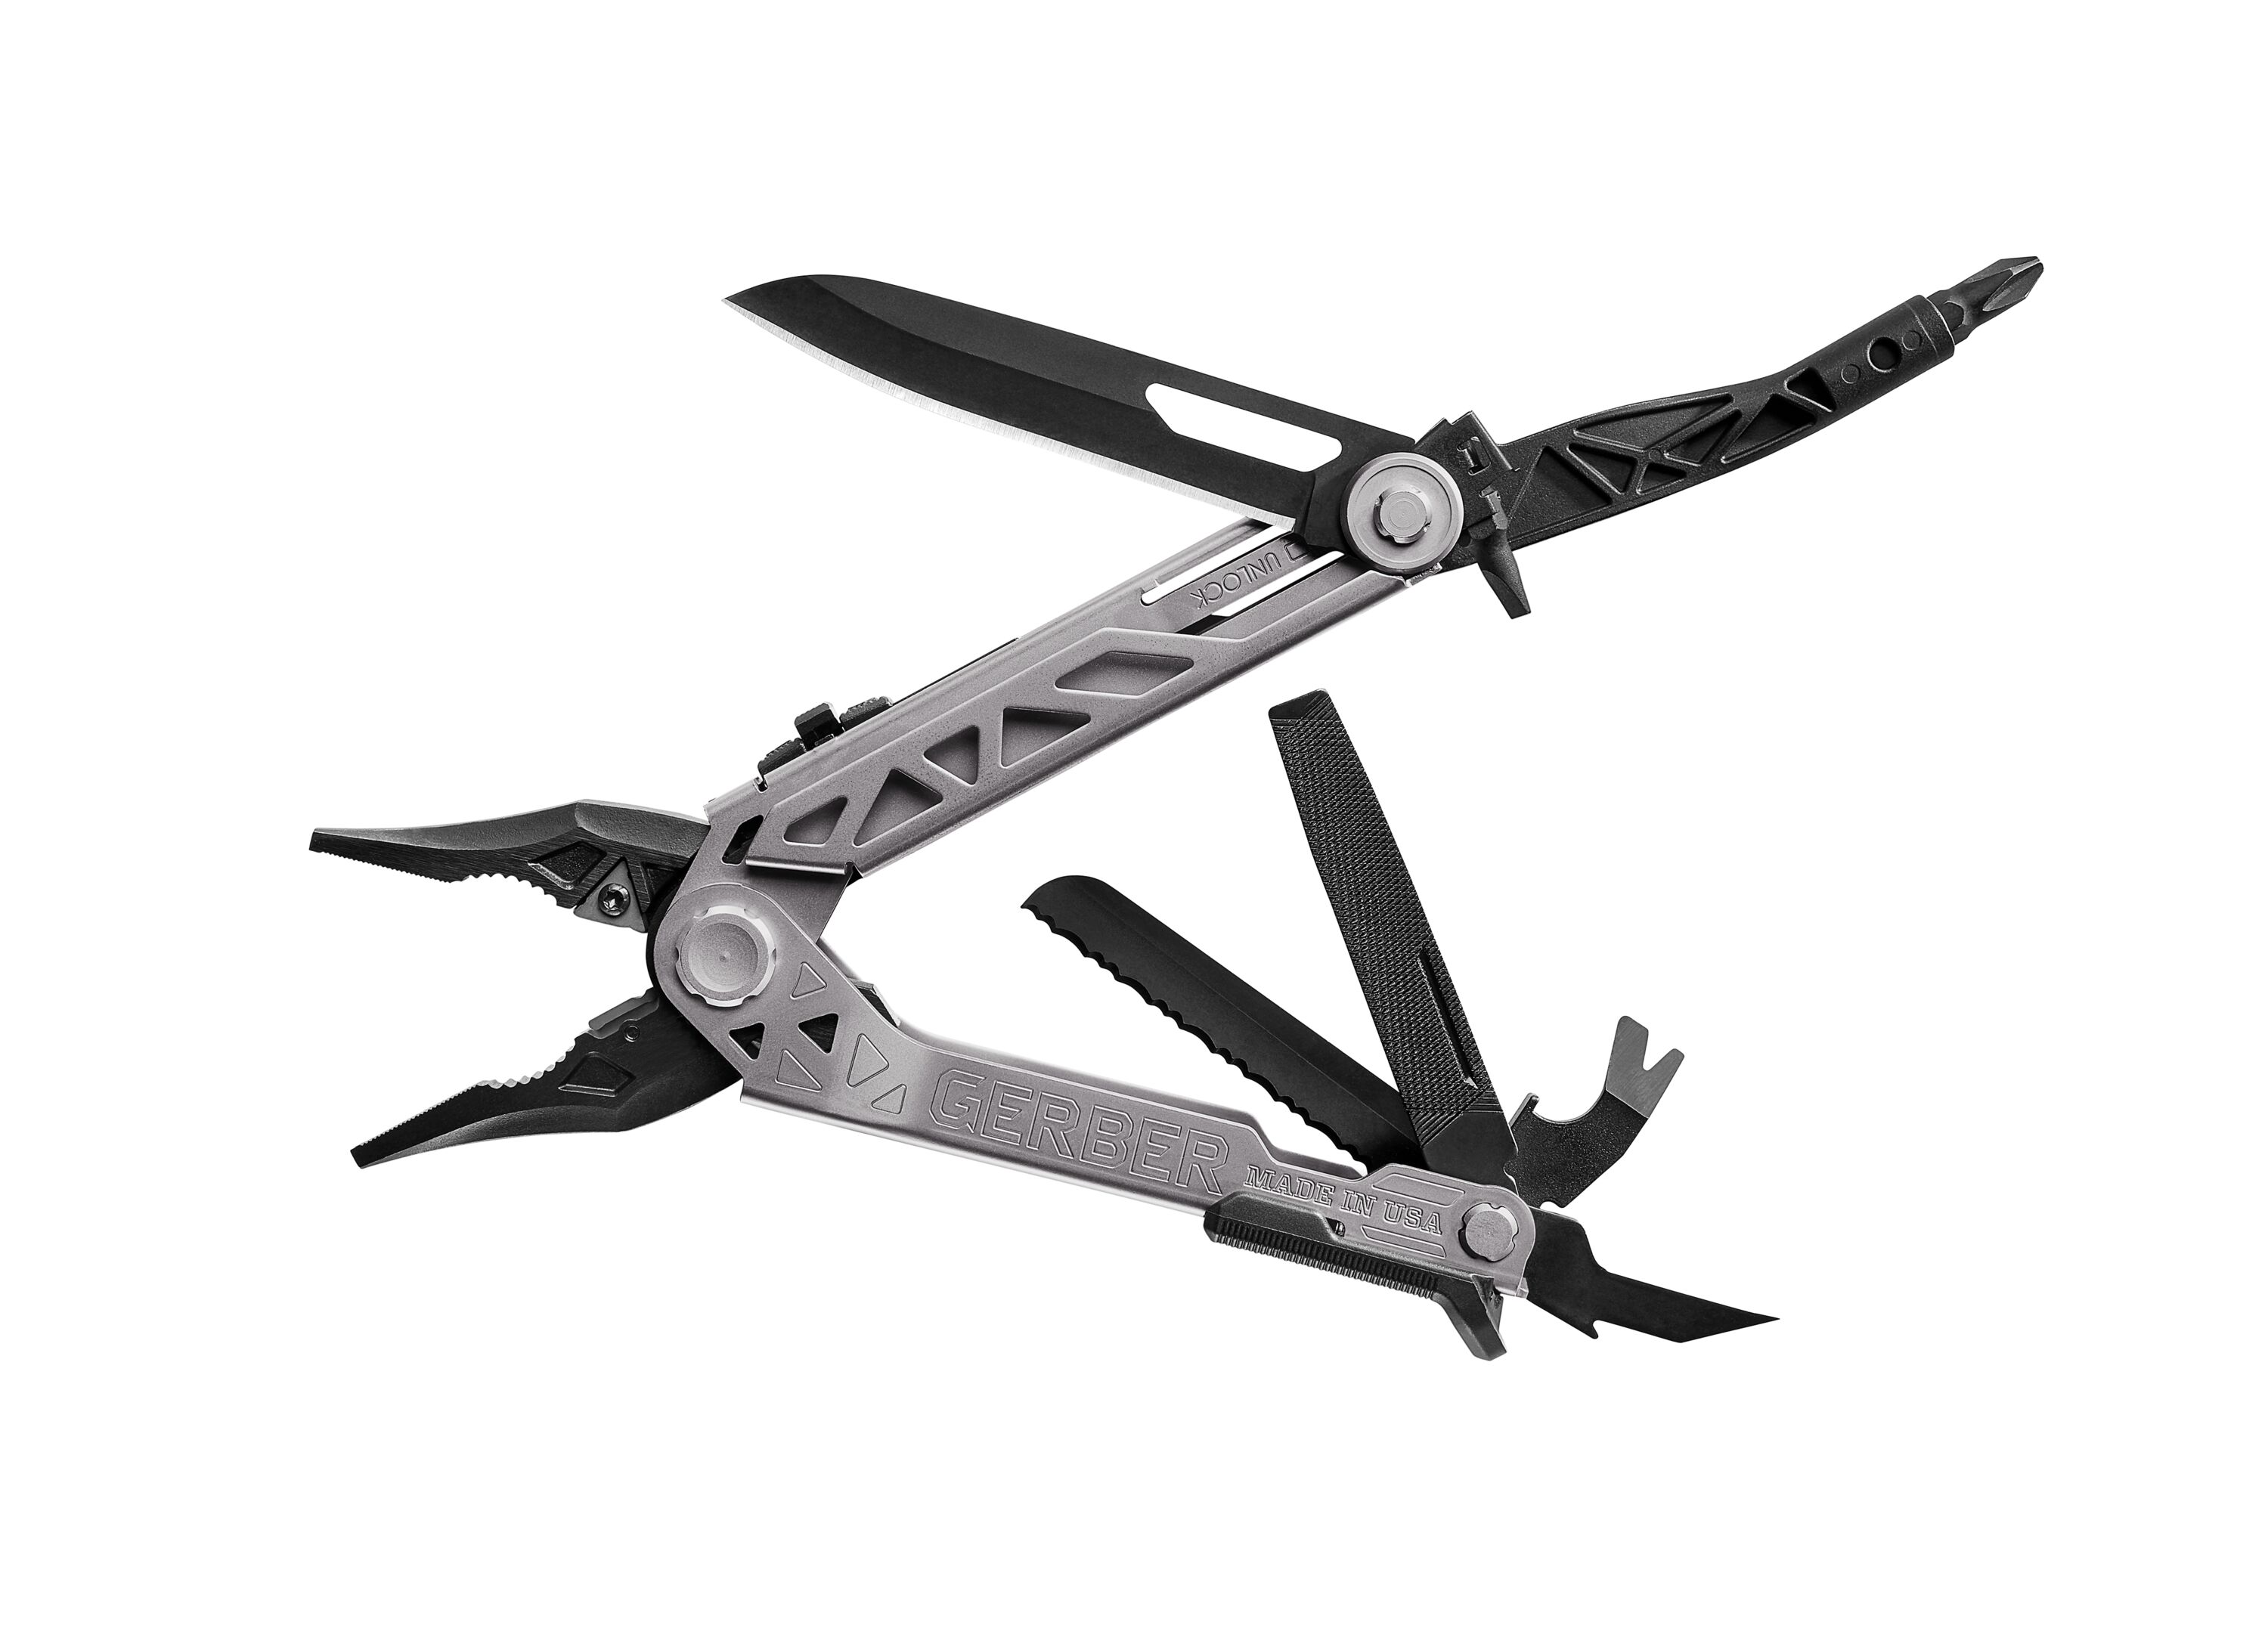 Multitool with Knife and Pliers - Utility Set of Mini Tools for Everyday  Use - Grand Way 104037